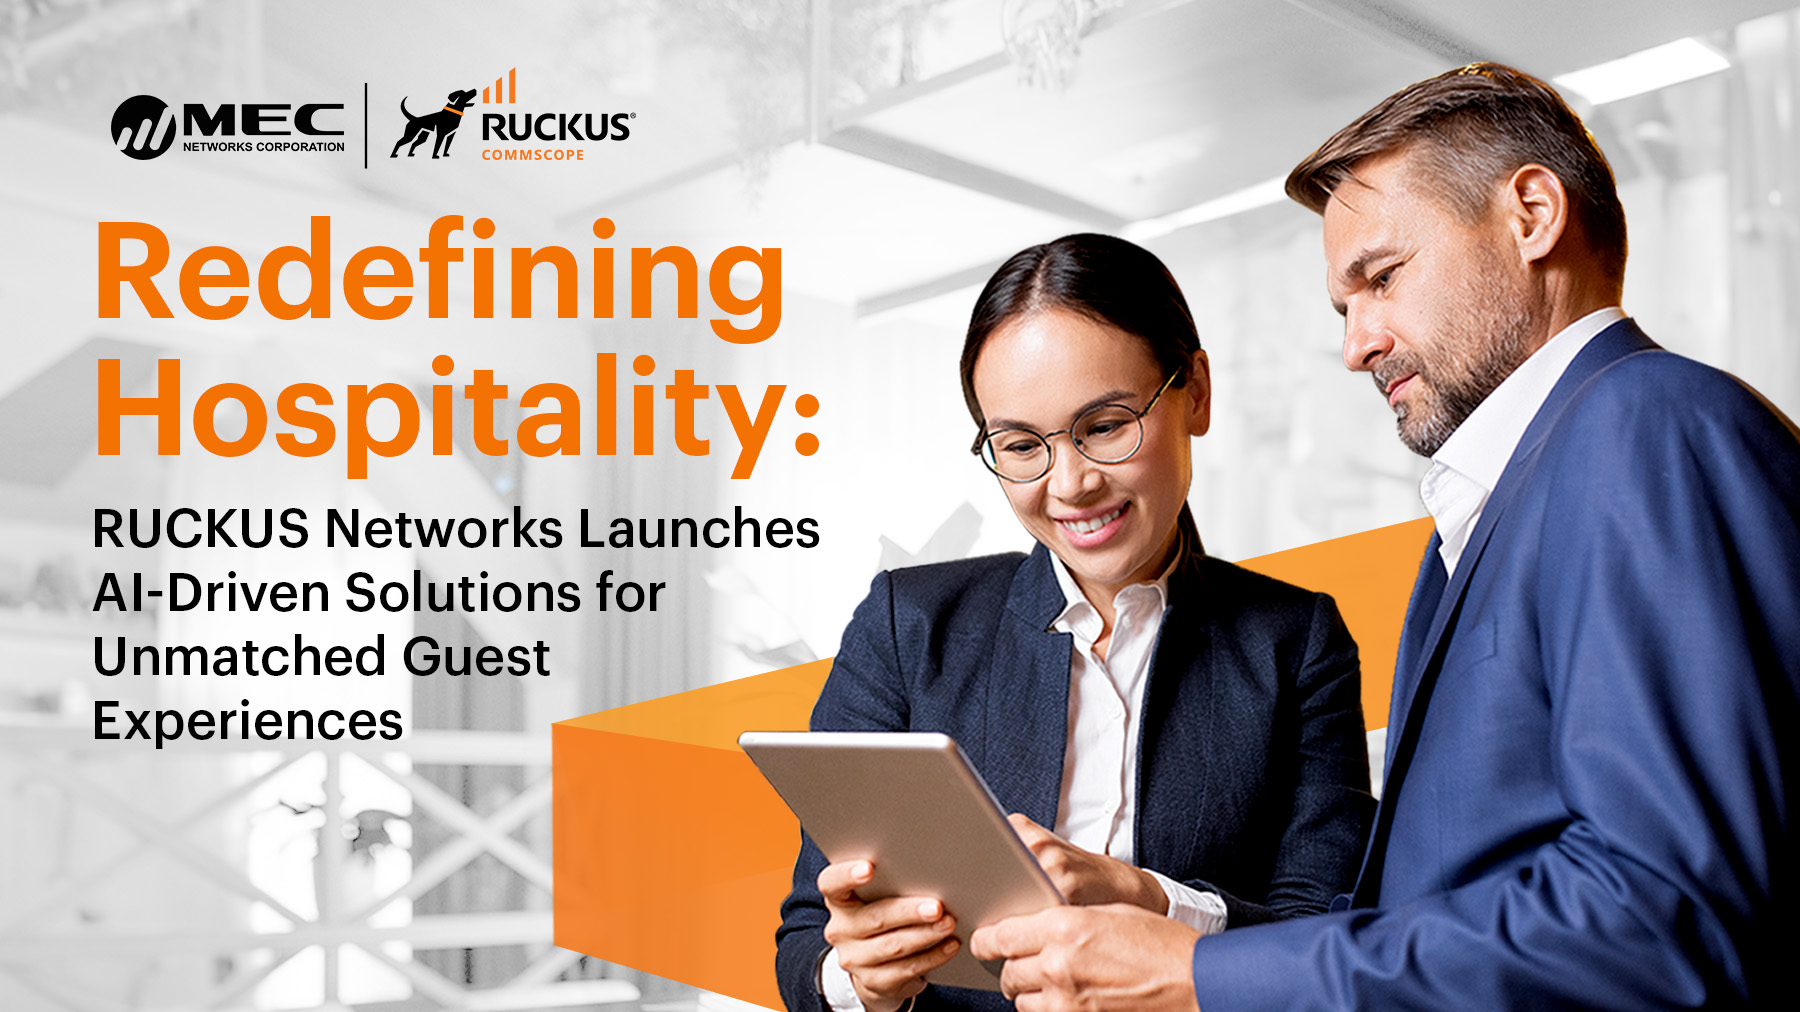 RUCKUS Networks Launches AI-Driven Solutions for Hospitality